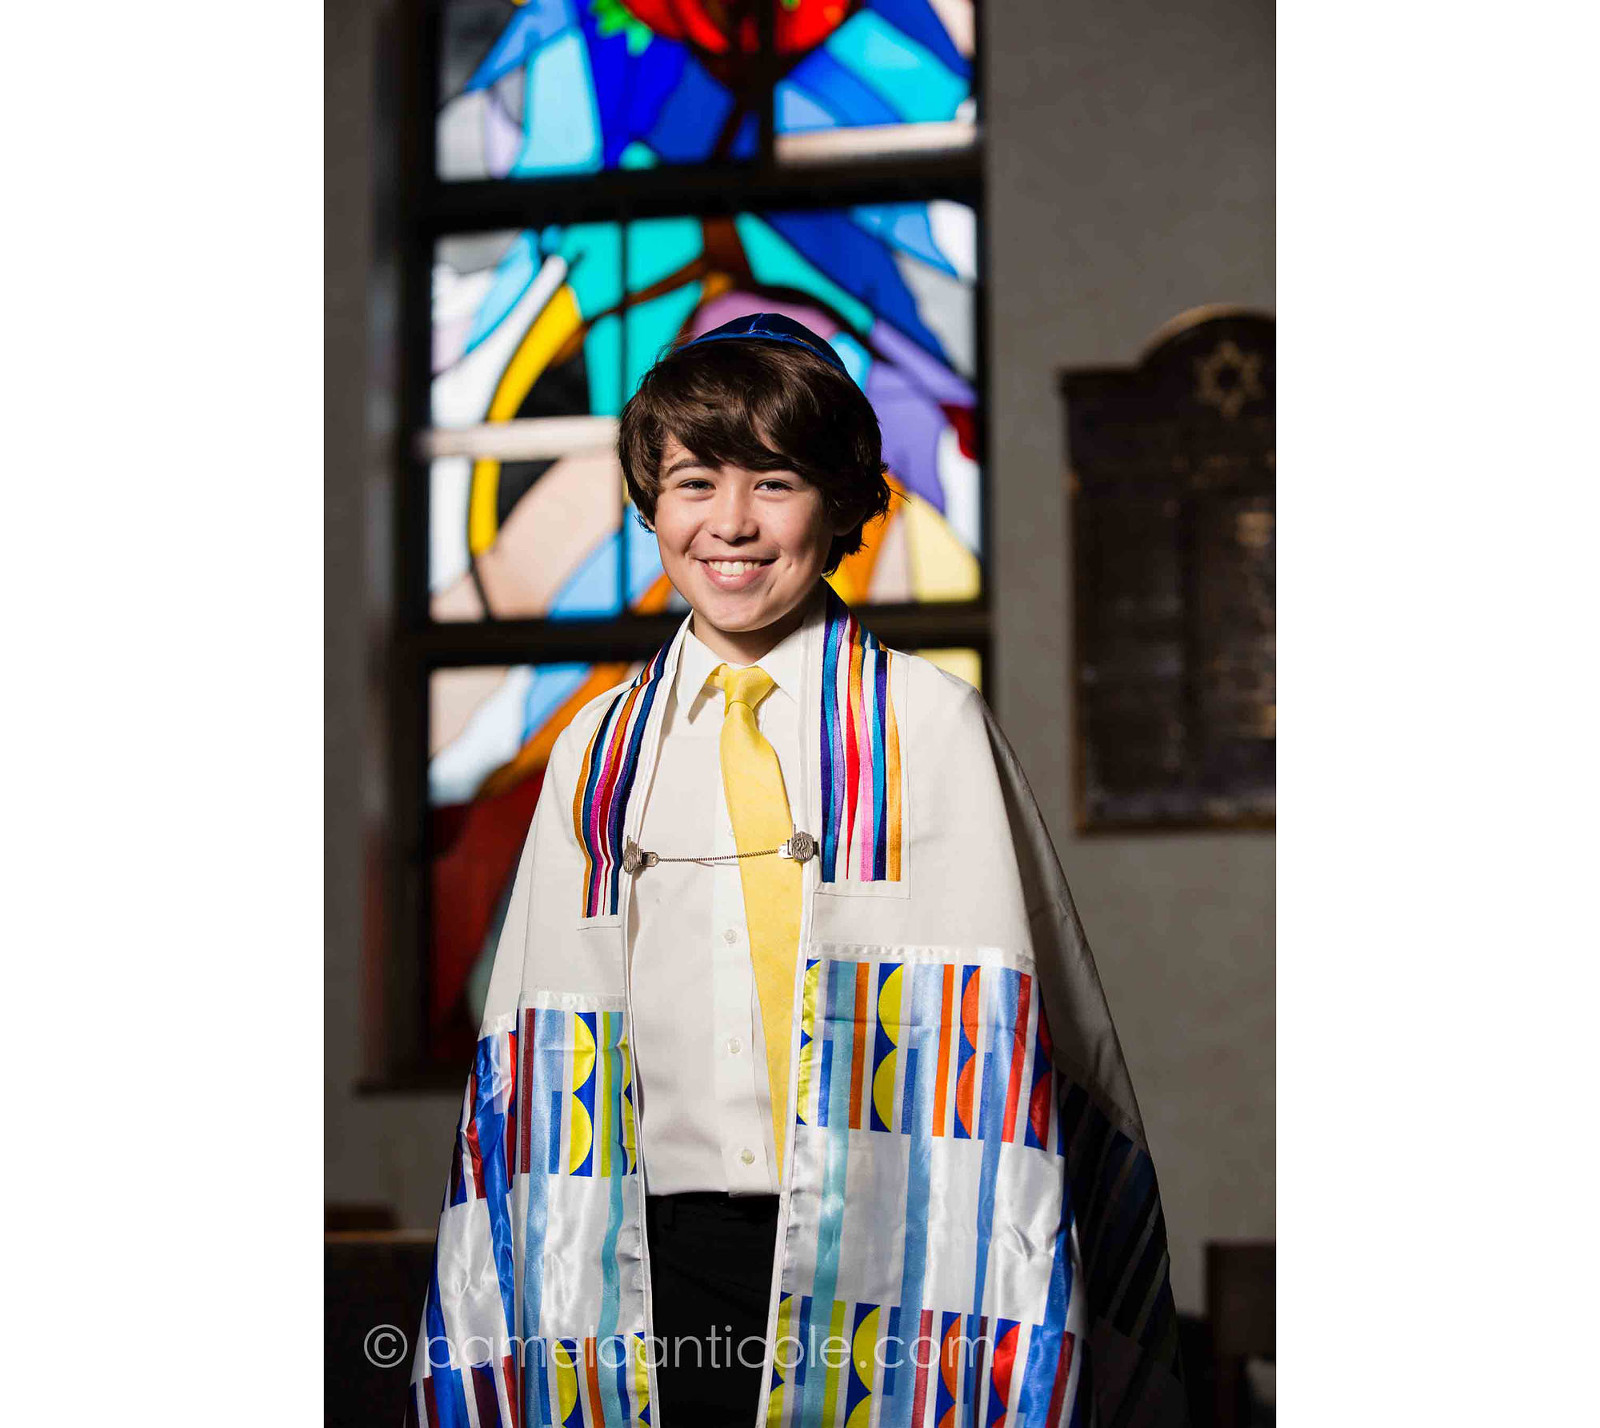 portrait of young boy in bar mitzvah attire, standing in front of stained glass window